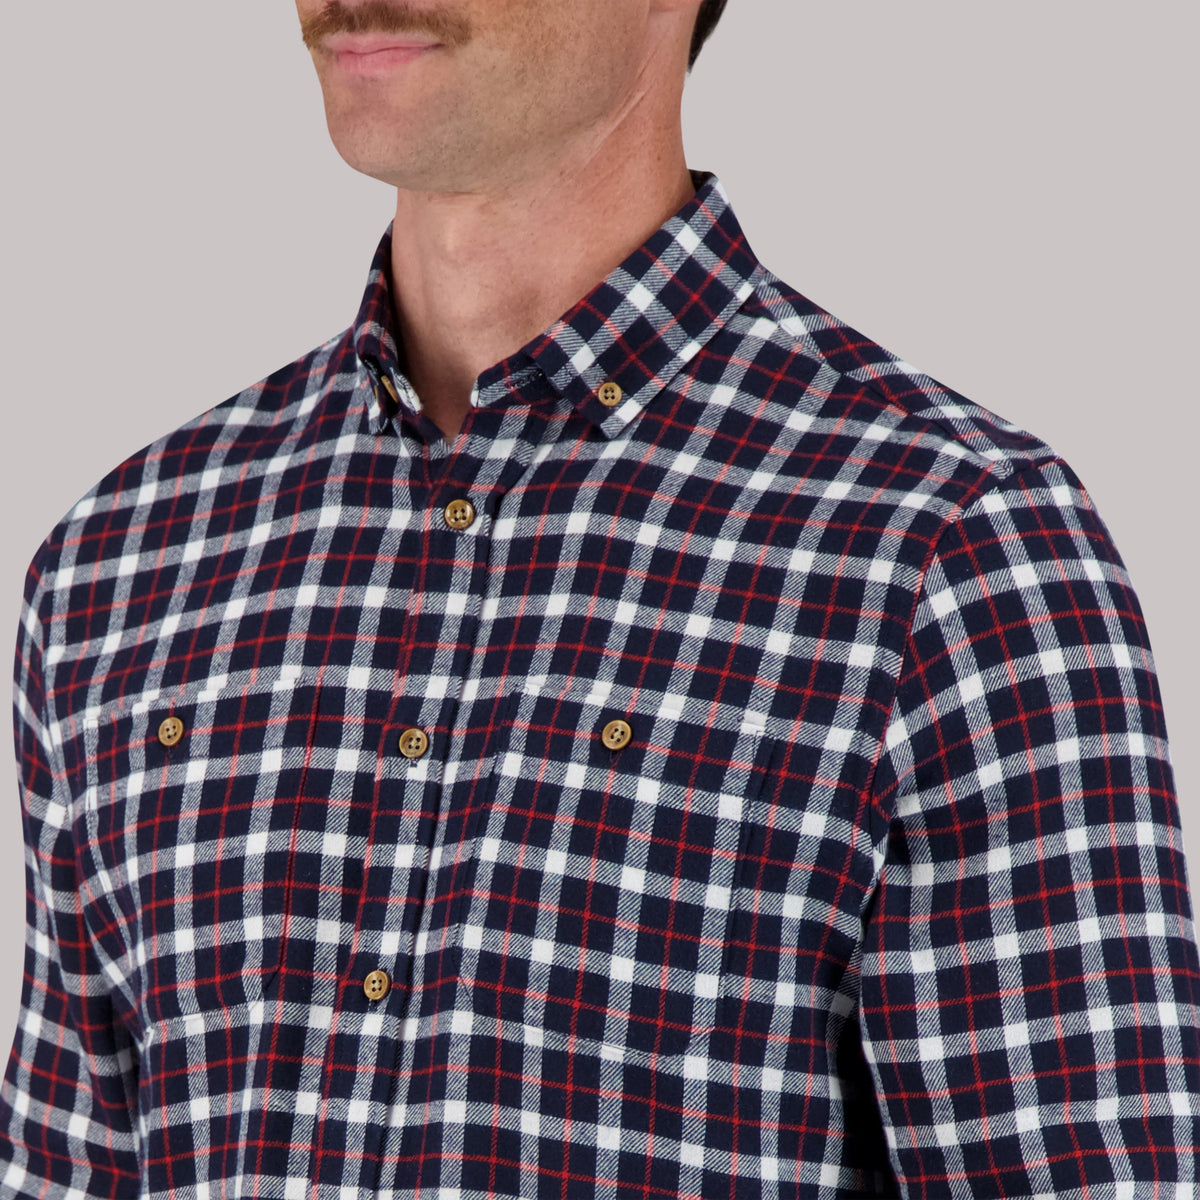 Long Sleeve Cotton Flannel Plaid Woven Sport Shirt in Navy